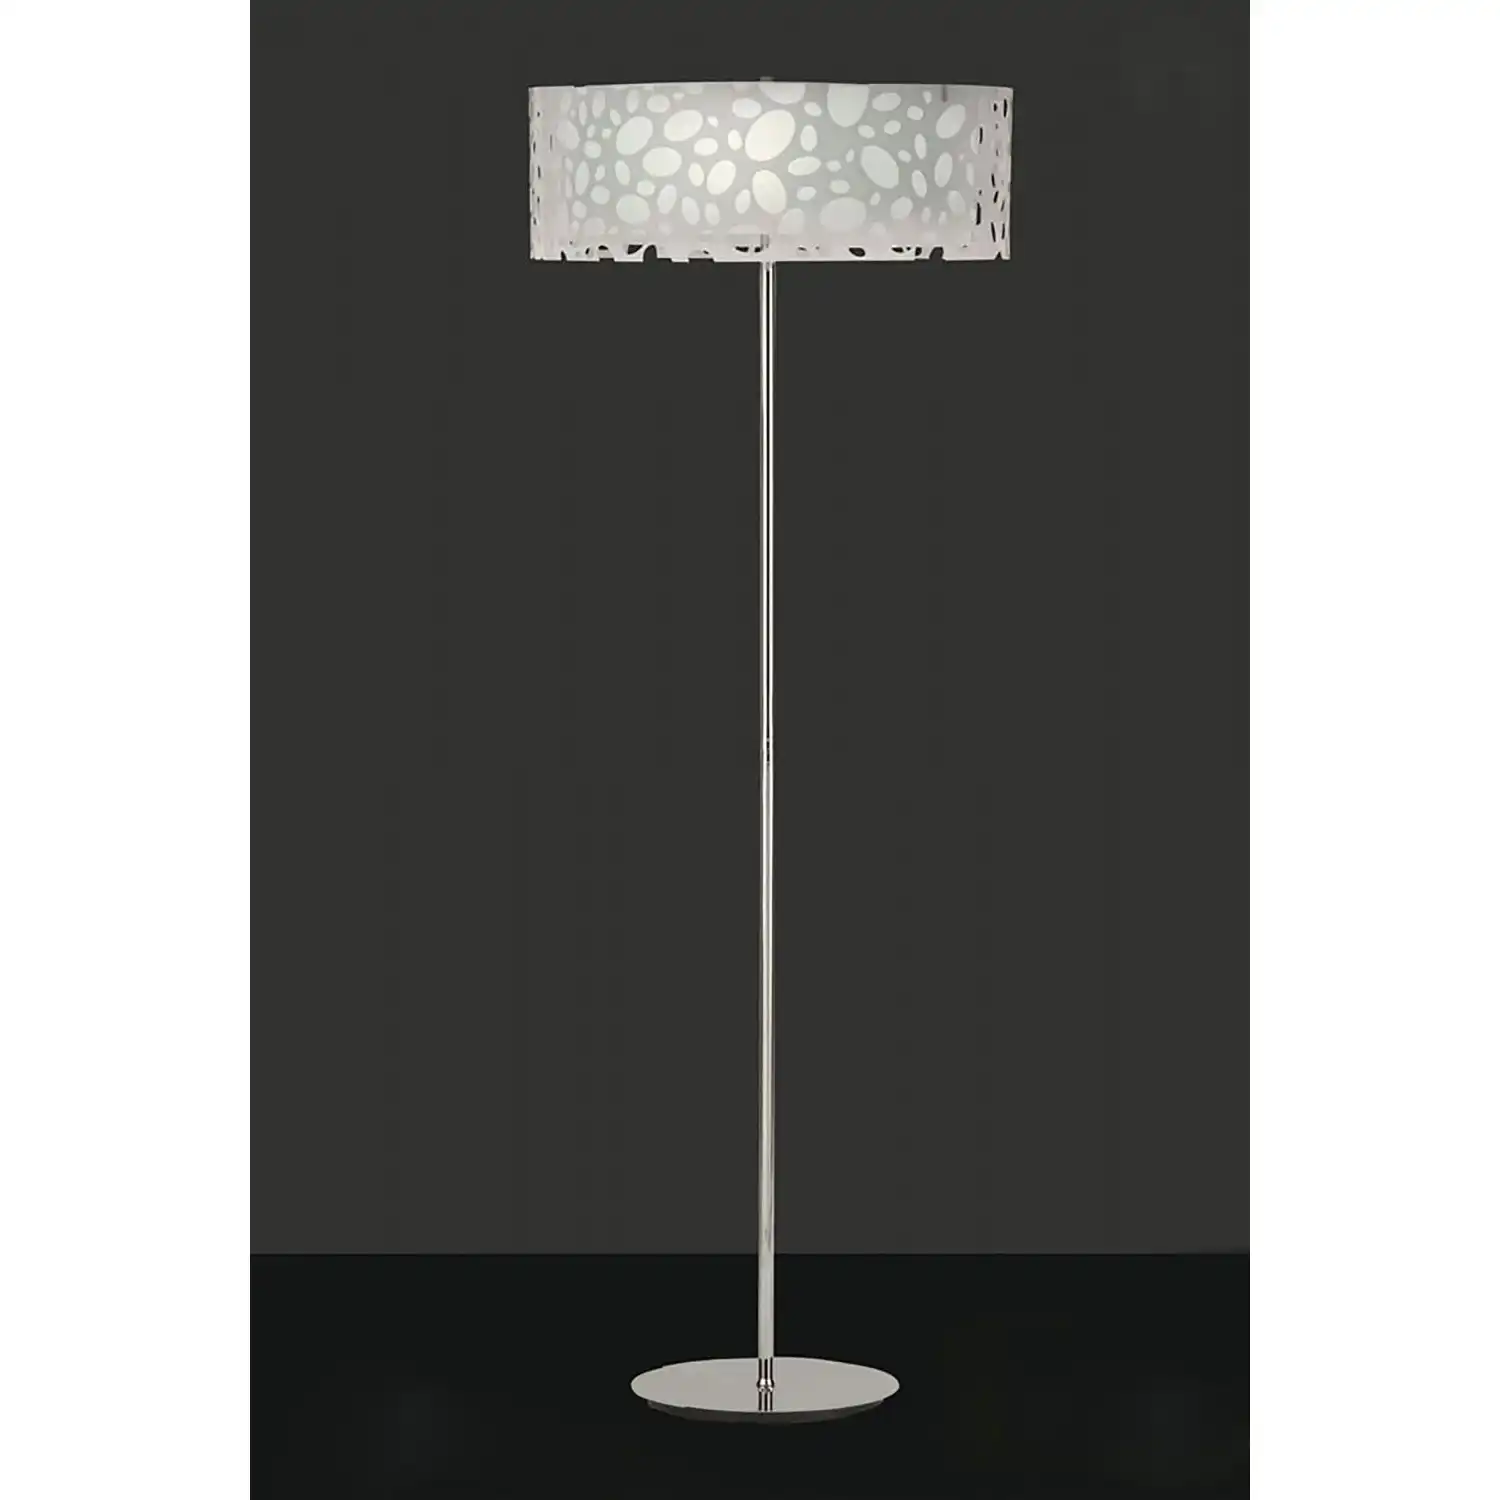 Lupin Floor Lamp 4 Light E27, Gloss White White Acrylic Polished Chrome, CFL Lamps INCLUDED